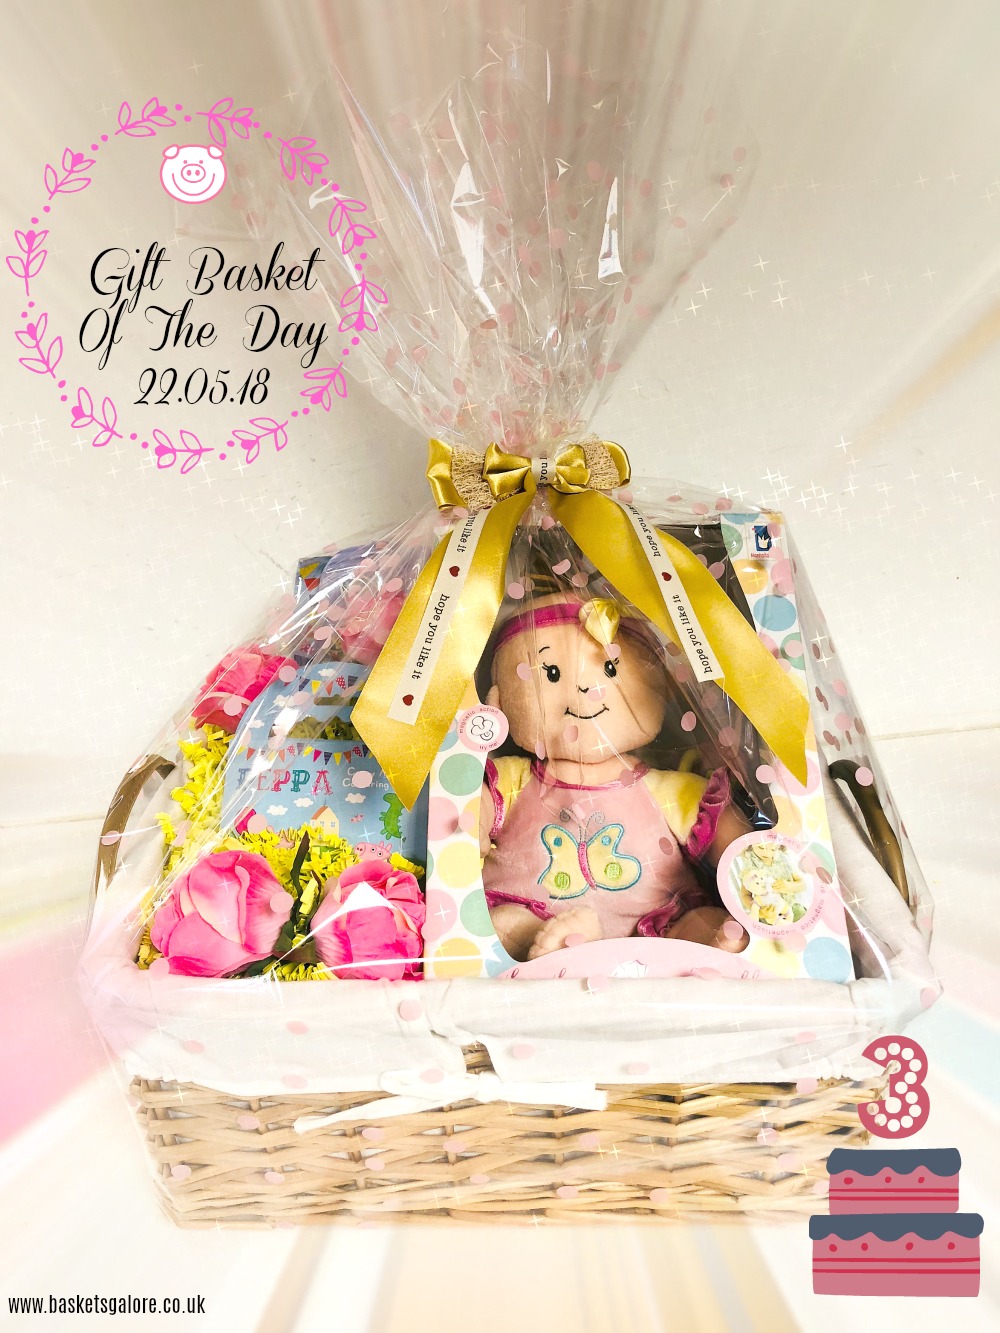 Baskets Galore’s Customer Gifts – Gift Basket of the Day 22.05.18